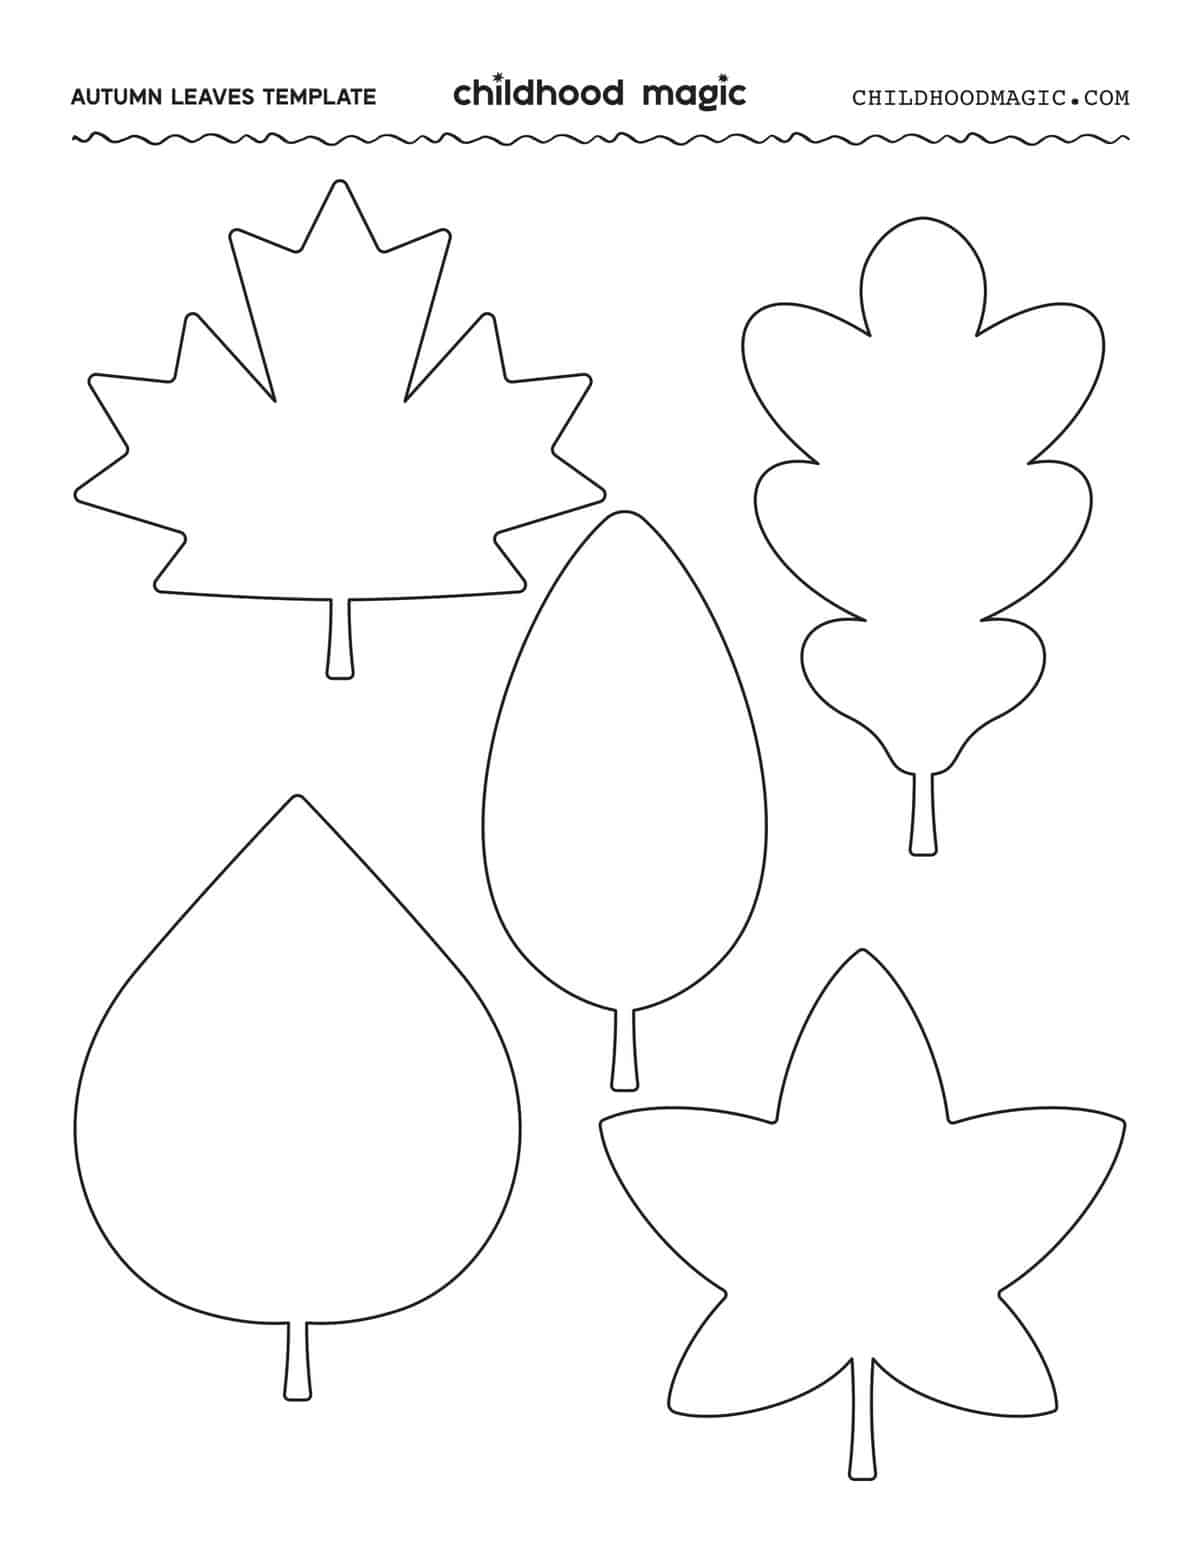 Leaf Templates, Free Printable Templates & Coloring Pages